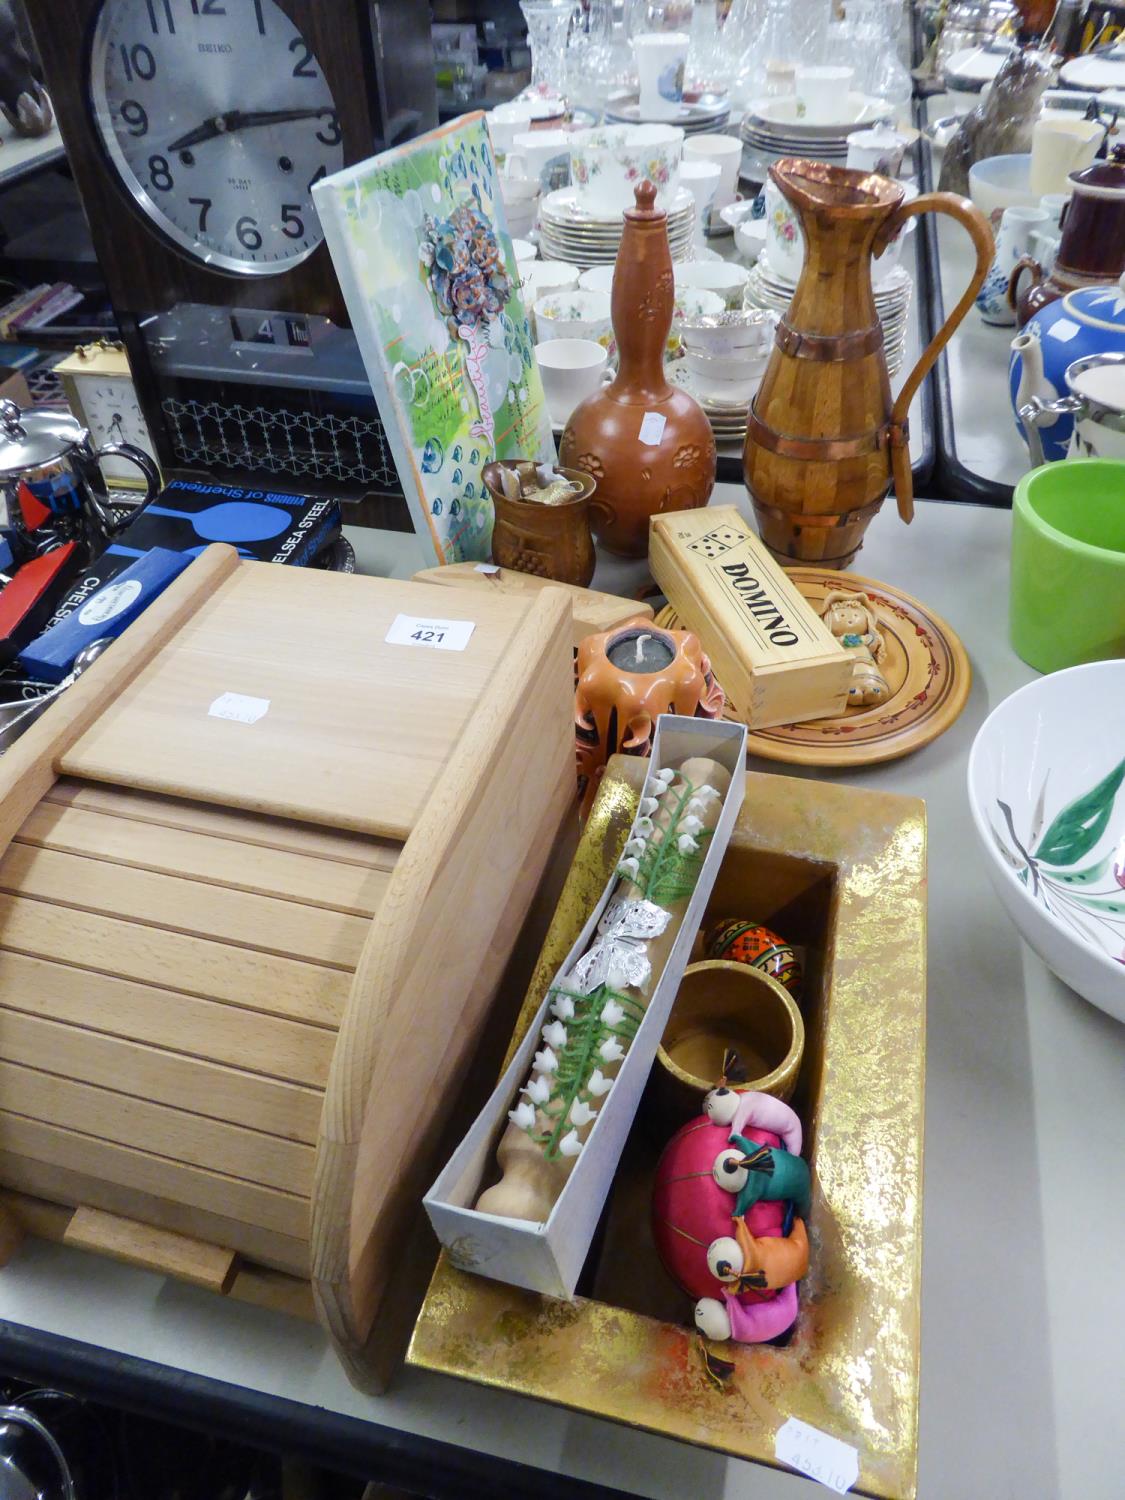 SELECTION OF WOODEN ITEMS, WATER JUG, SMALL BREAD BIN ETC....